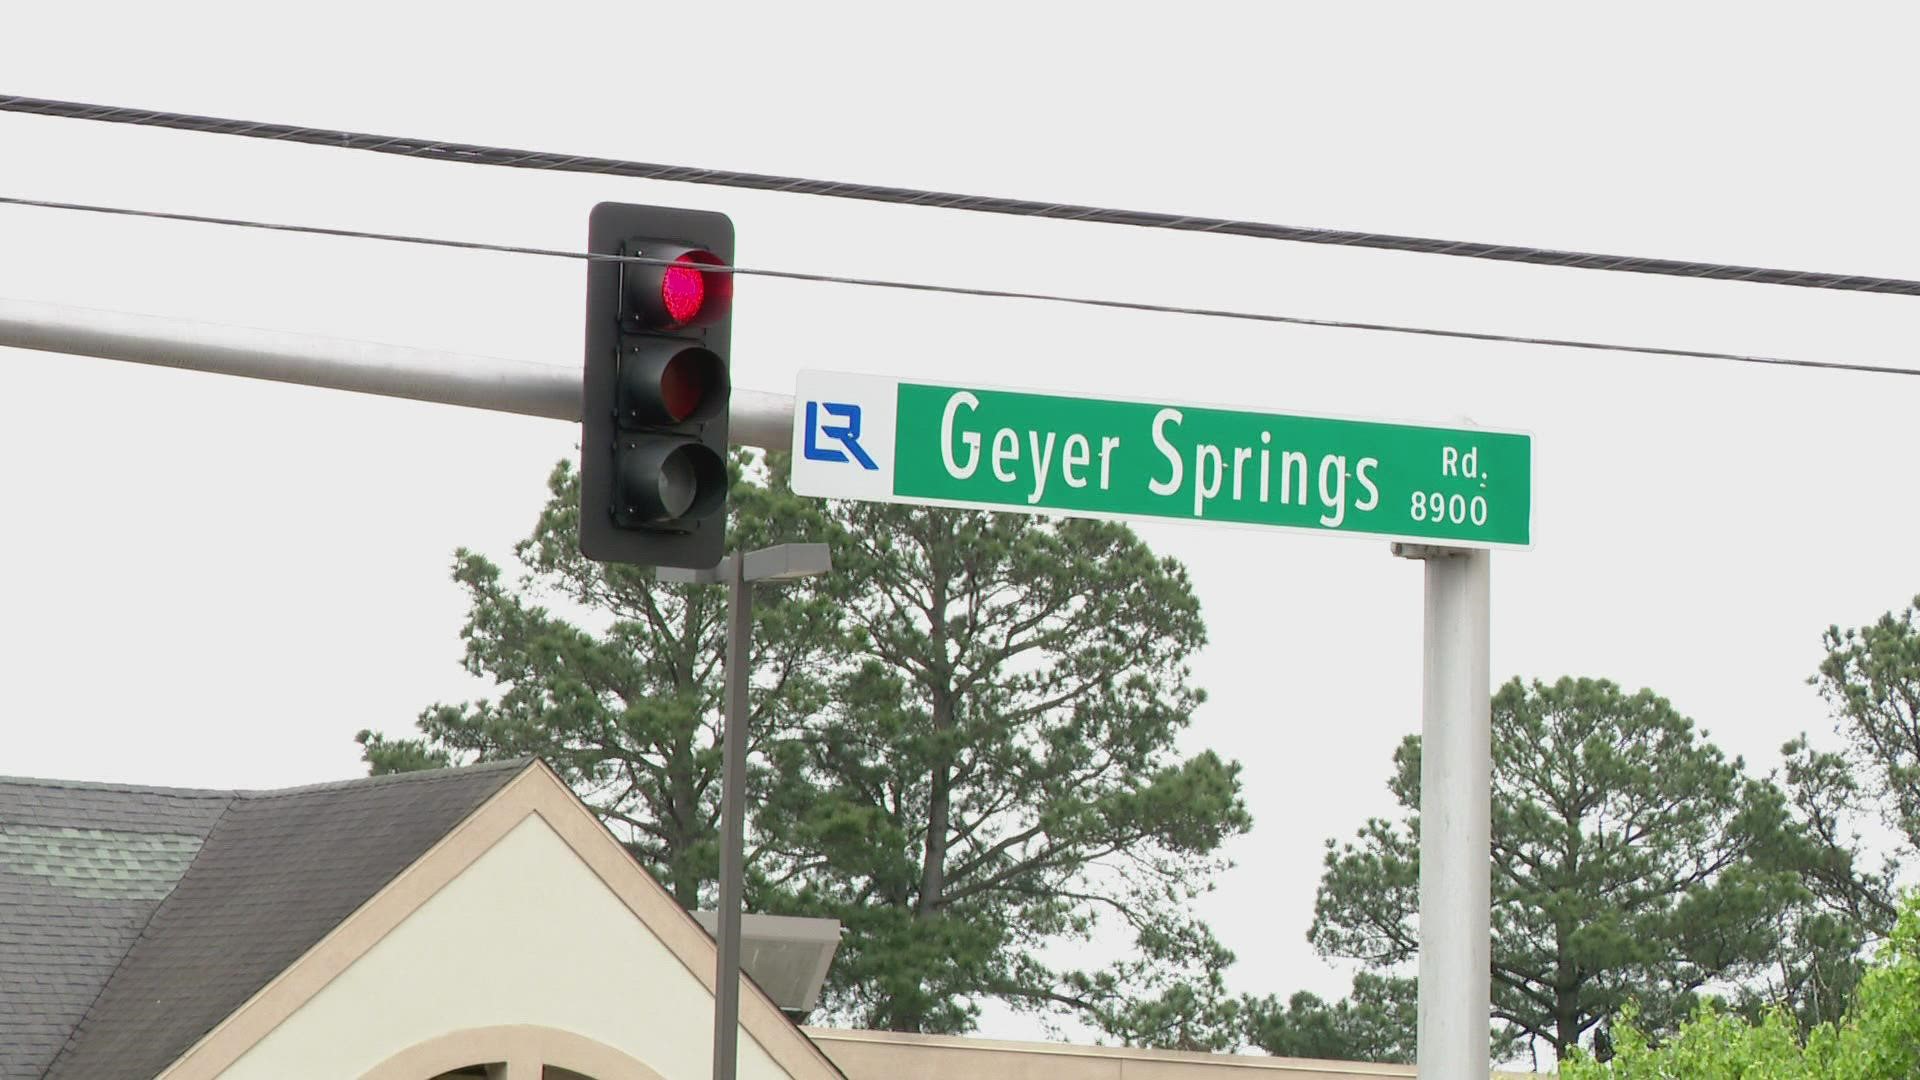 Little Rock police are investigating a shooting that left one person dead near Baseline and Geyer Springs Road on Sunday.